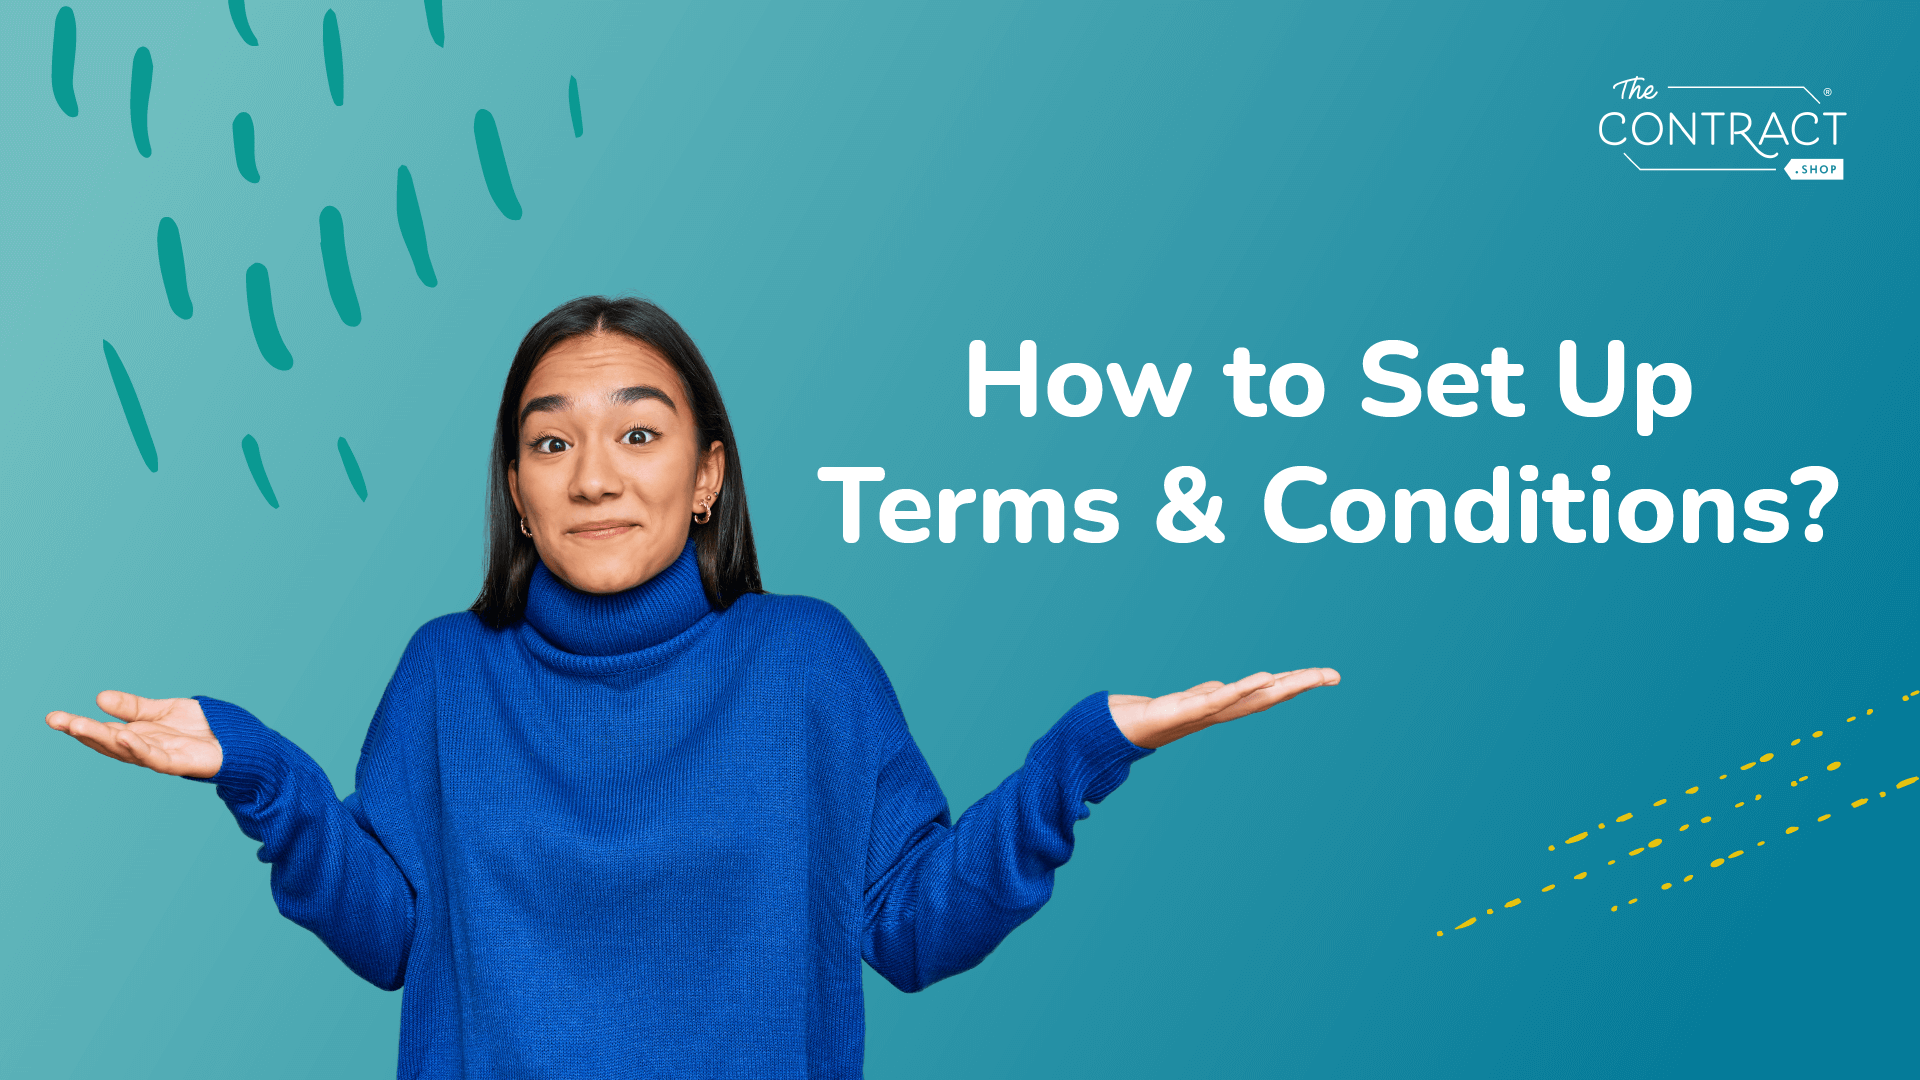 How to Set Up Terms & Conditions?